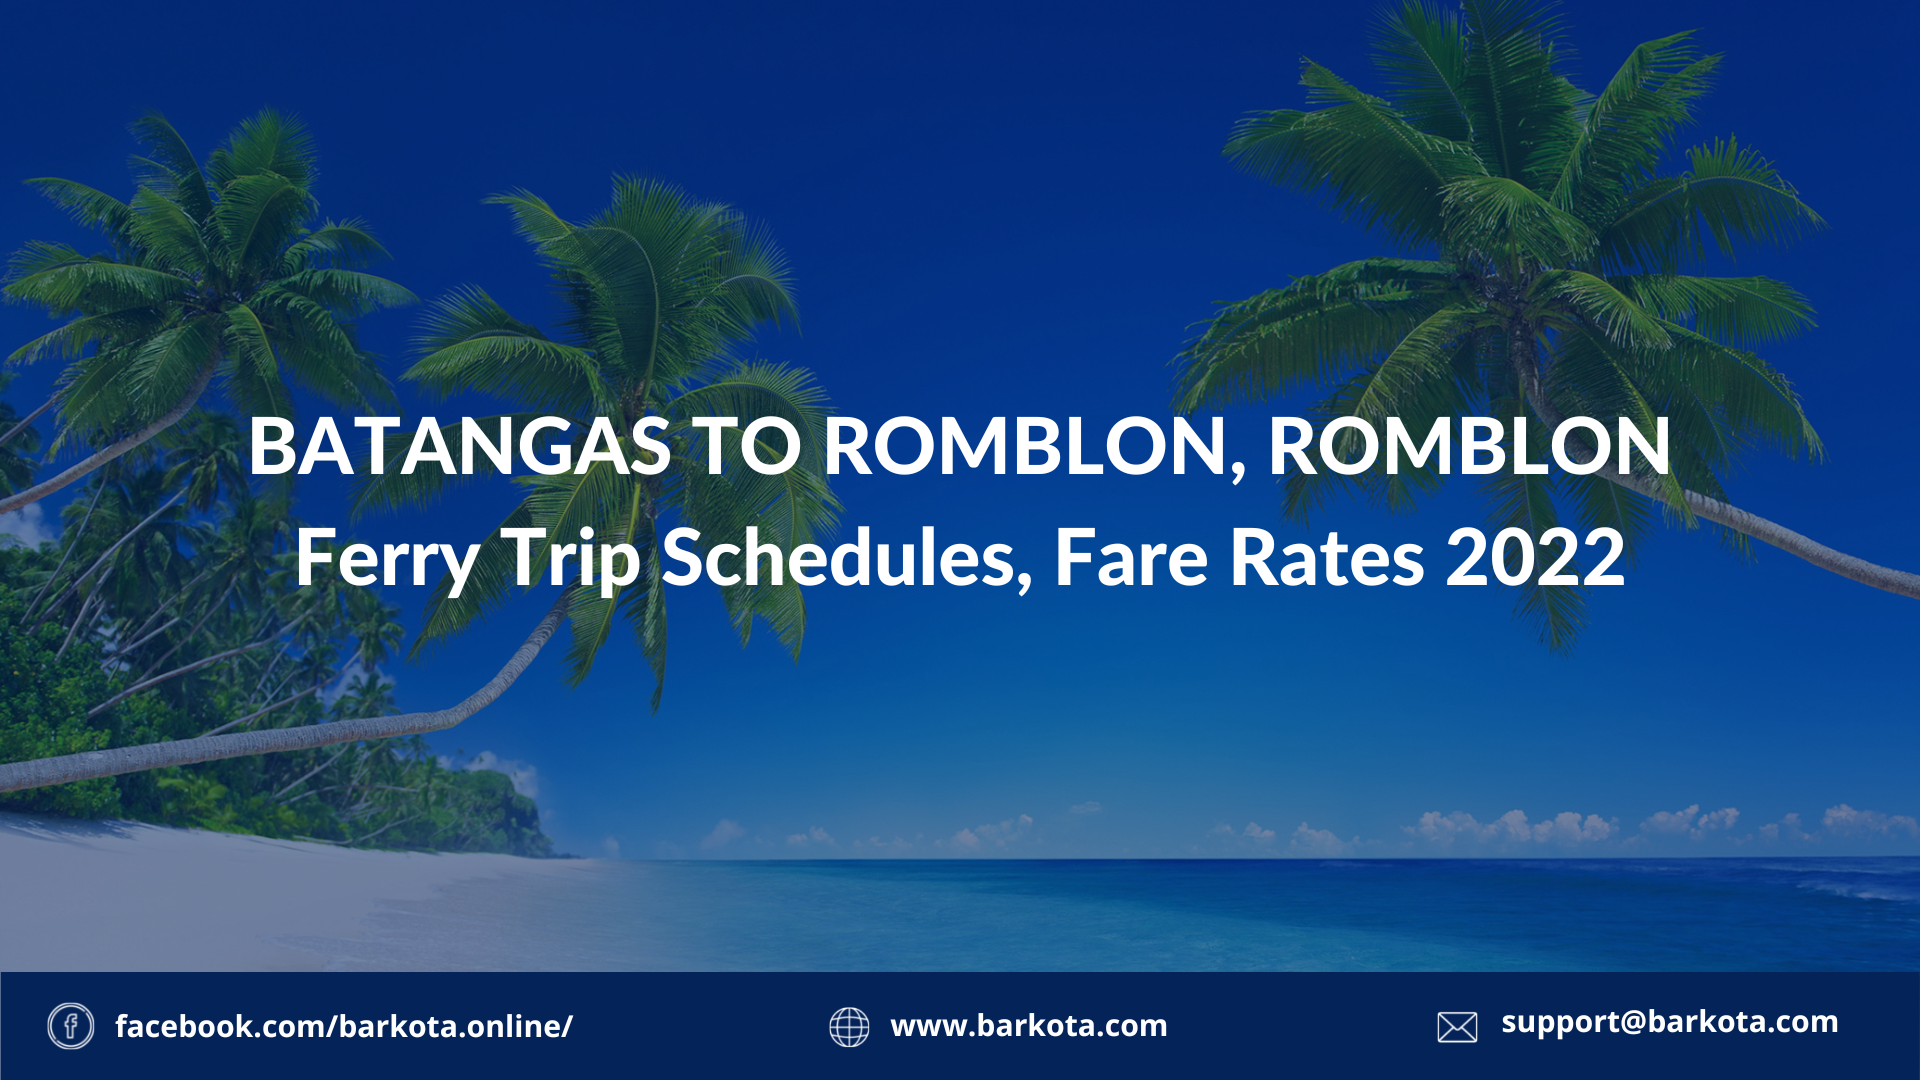 Batangas to Romblon Ferry Schedule and Fare Rates